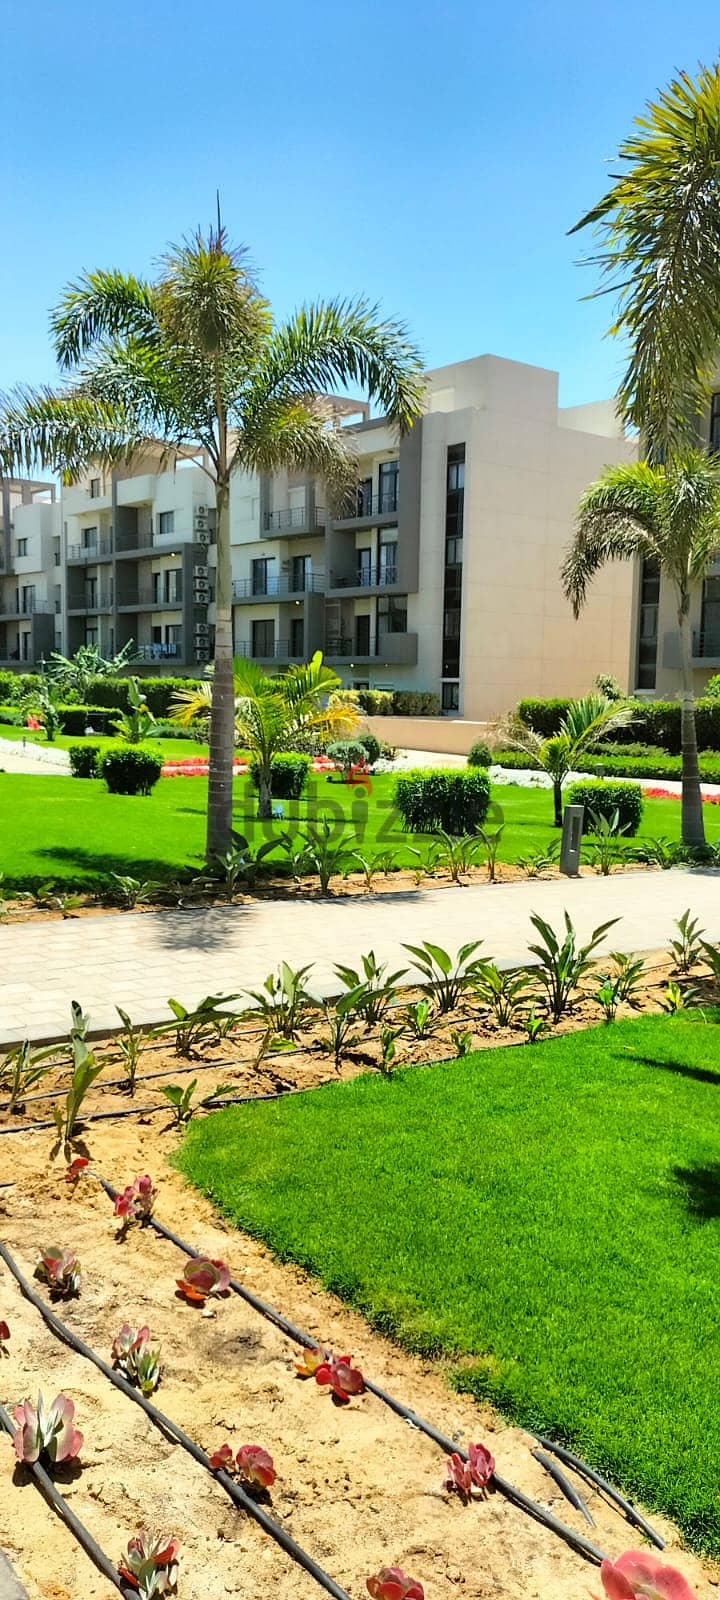 Apartment for sale with private garden, fully finished, with air conditioners and ready to move with an open view and landscape 6